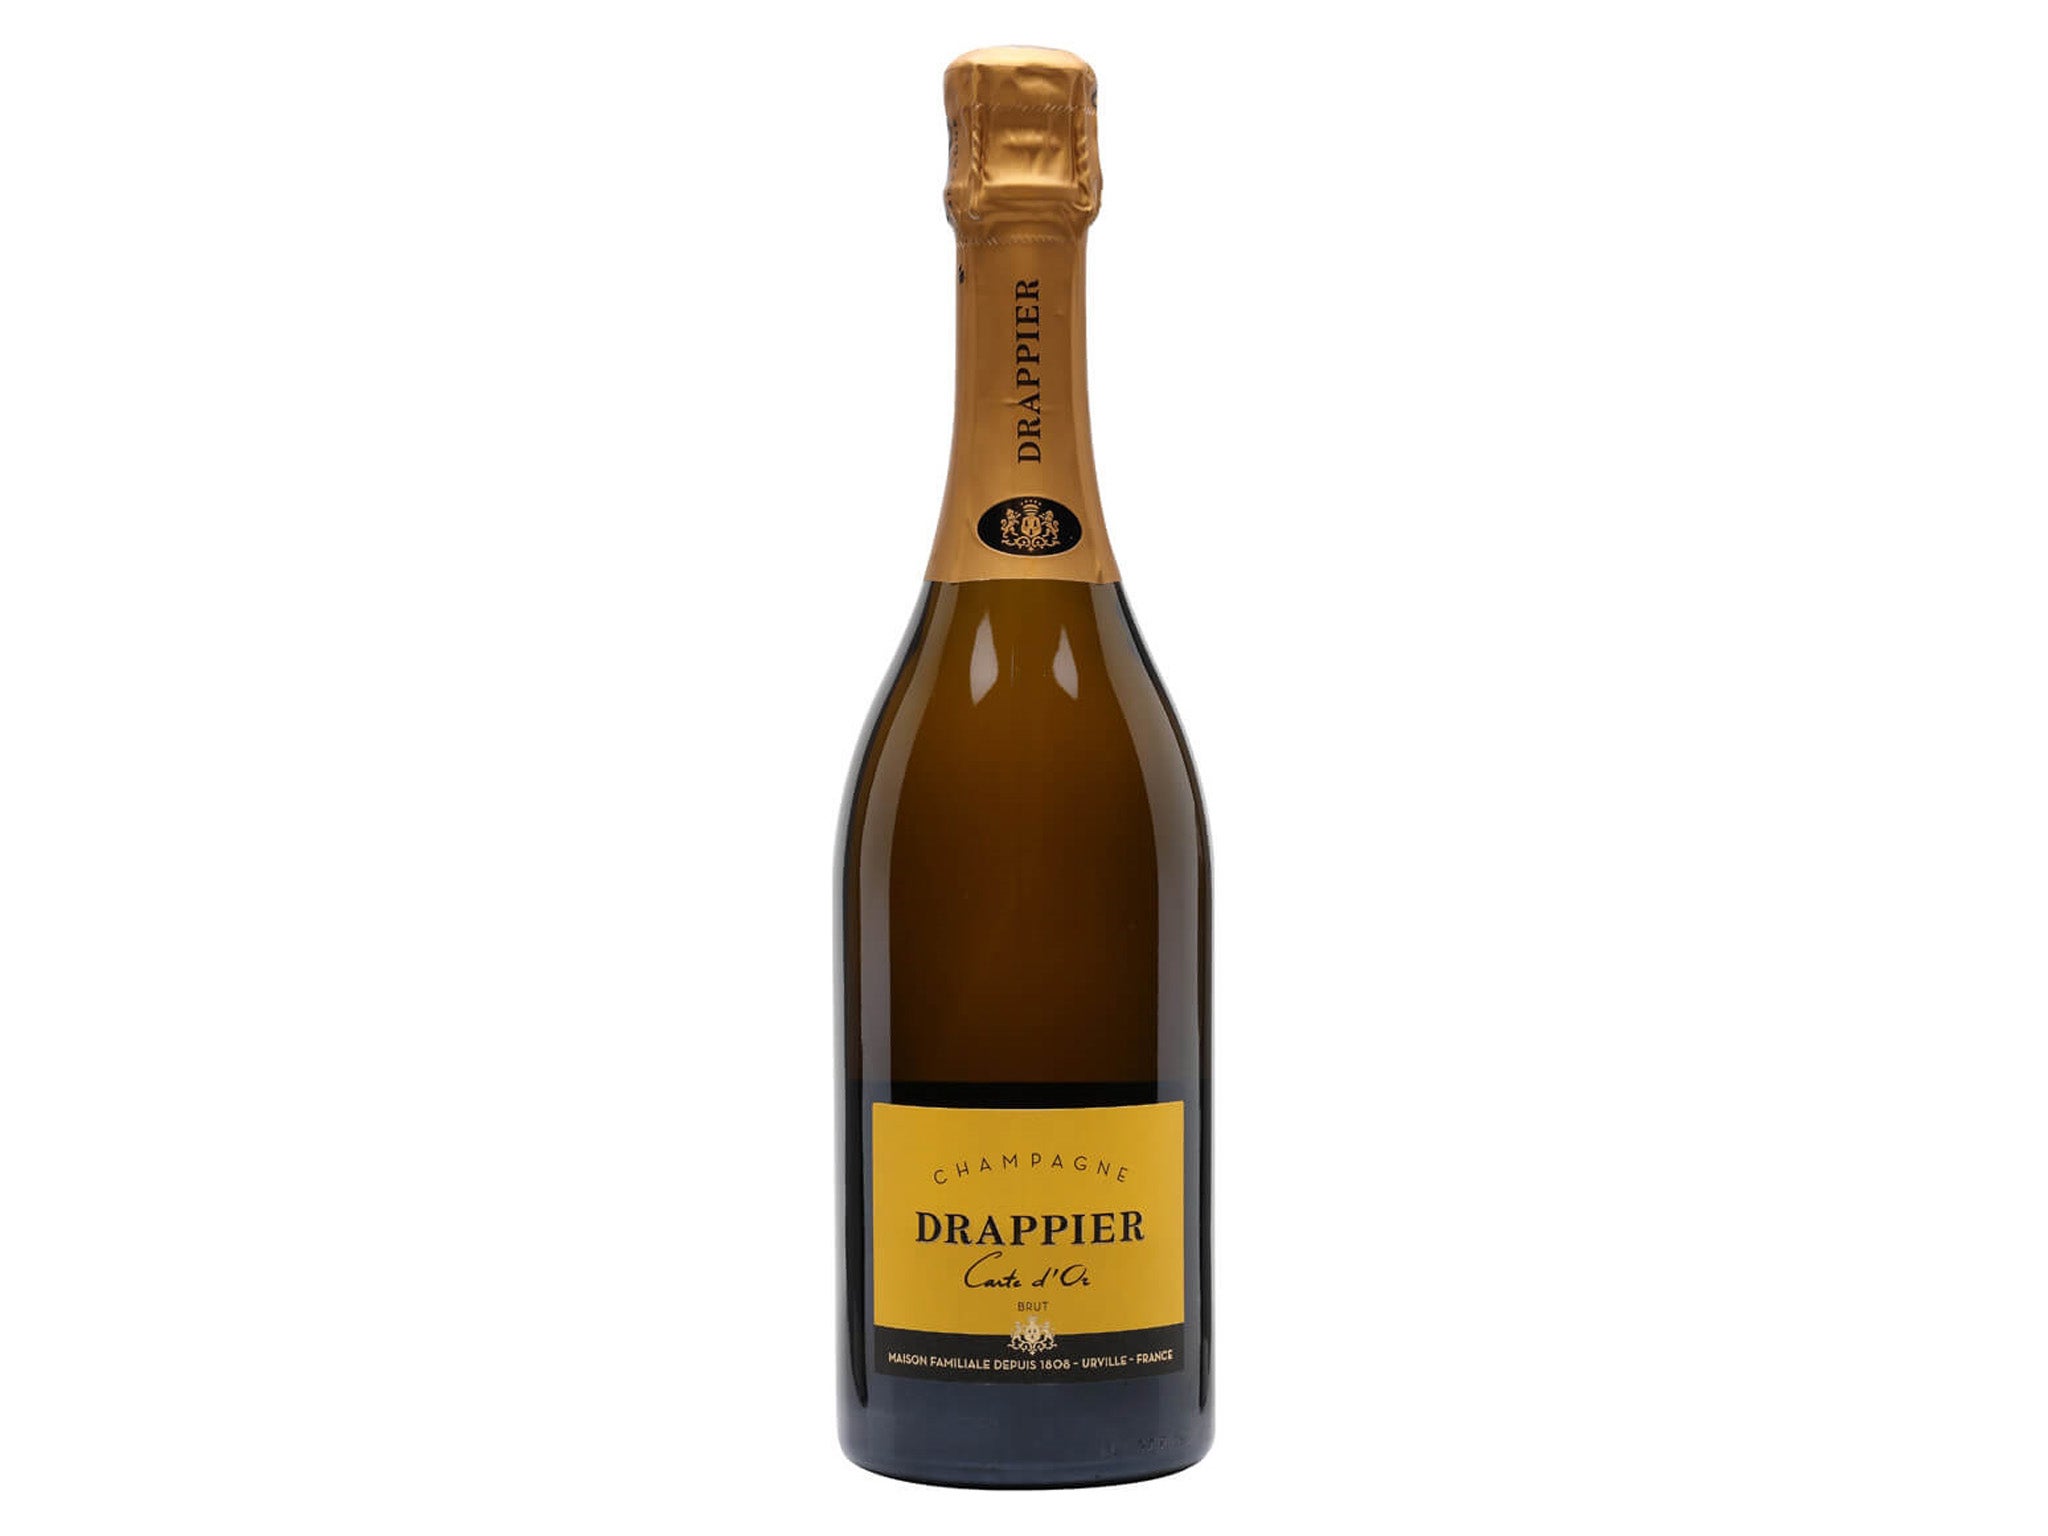 Drappier-Indybest-champagne-review